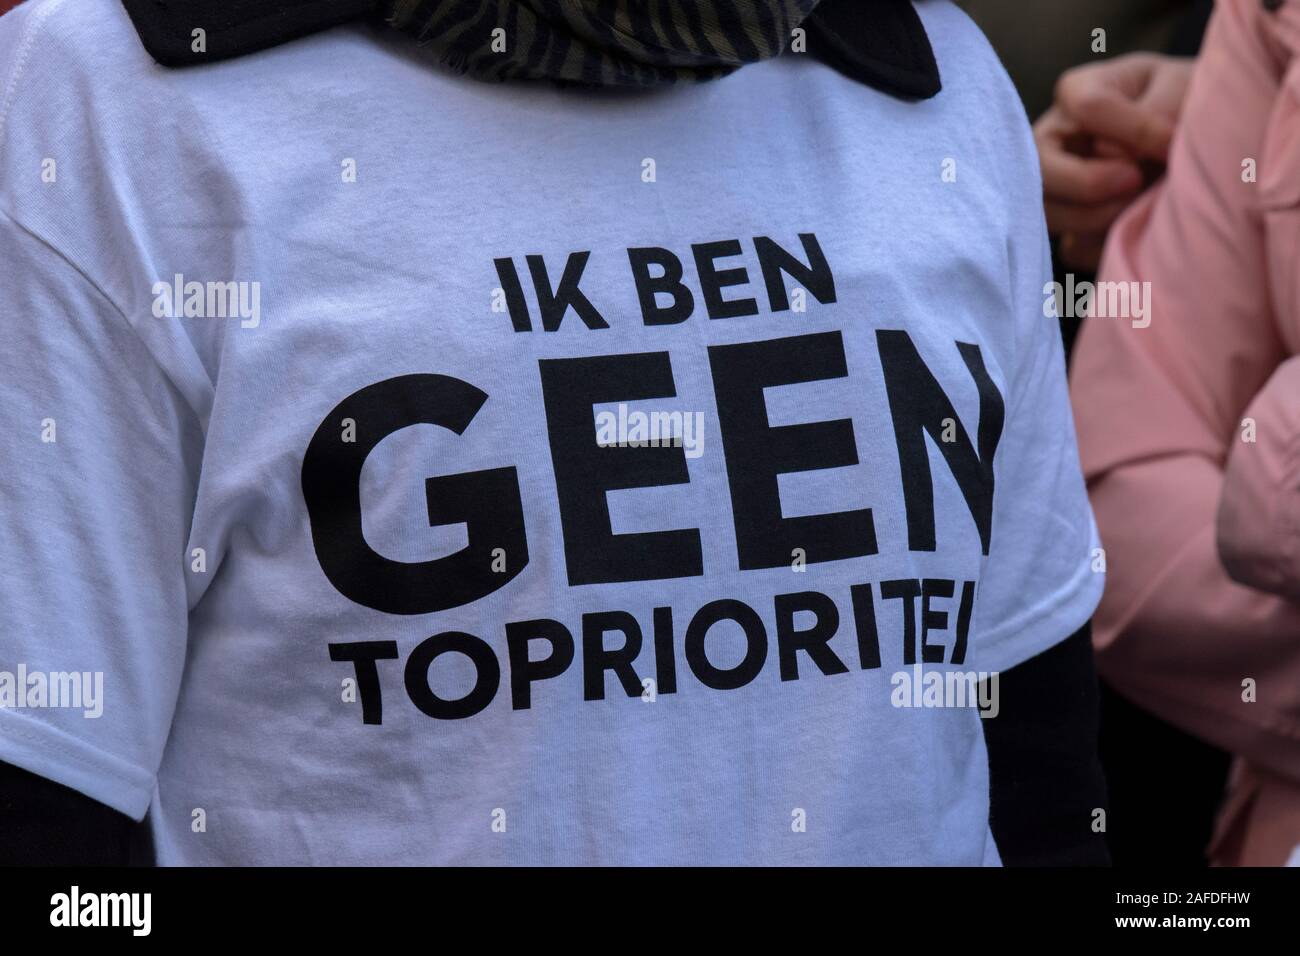 T-Shirt Ik Ben Geen Top Prioriteit At The Demonstration On The Dam Square  Amsterdam The Netherlands 2019 Stock Photo - Alamy